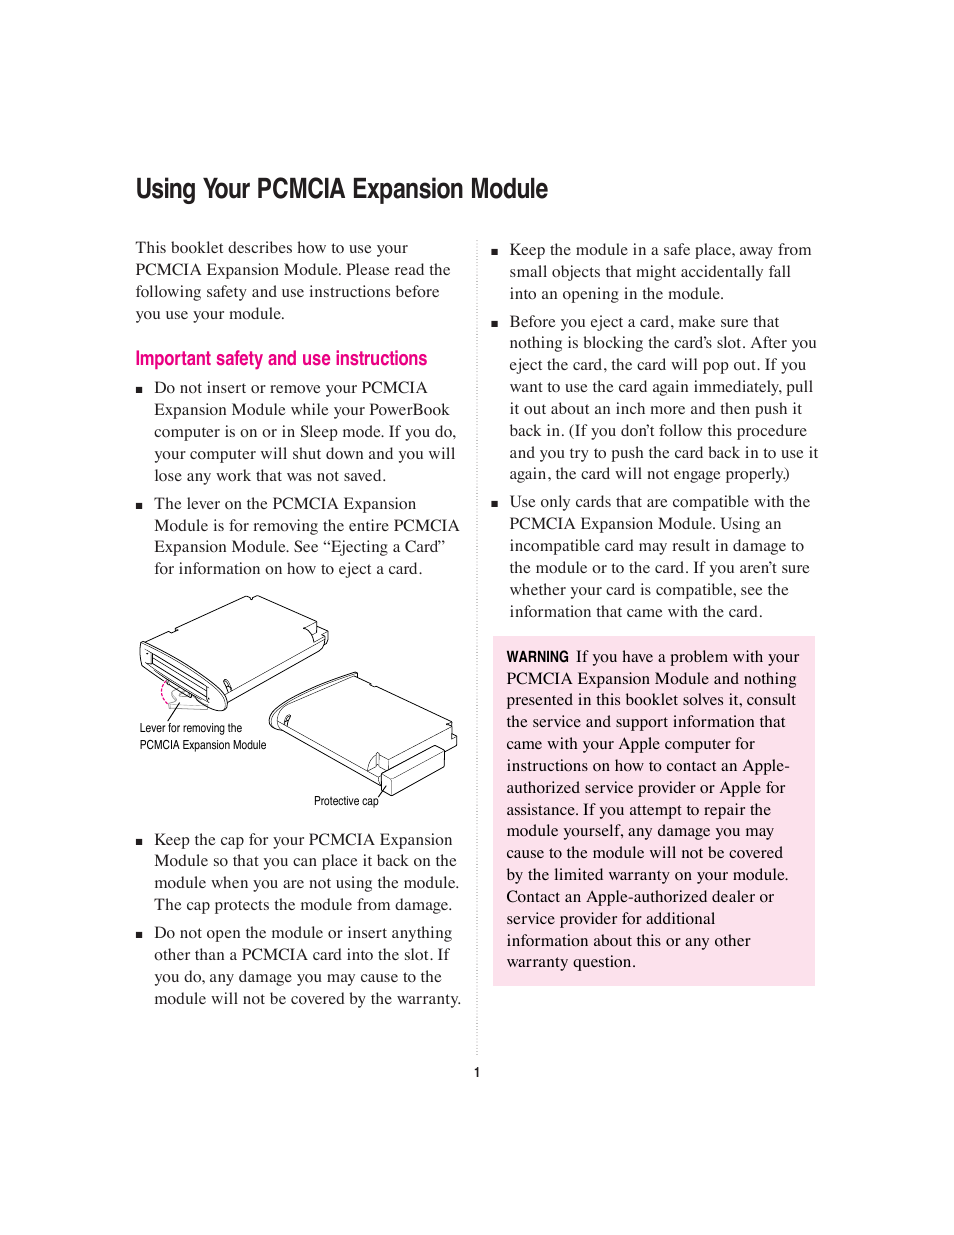 PowerBook PCMCIA Expansion Module (Page 1)